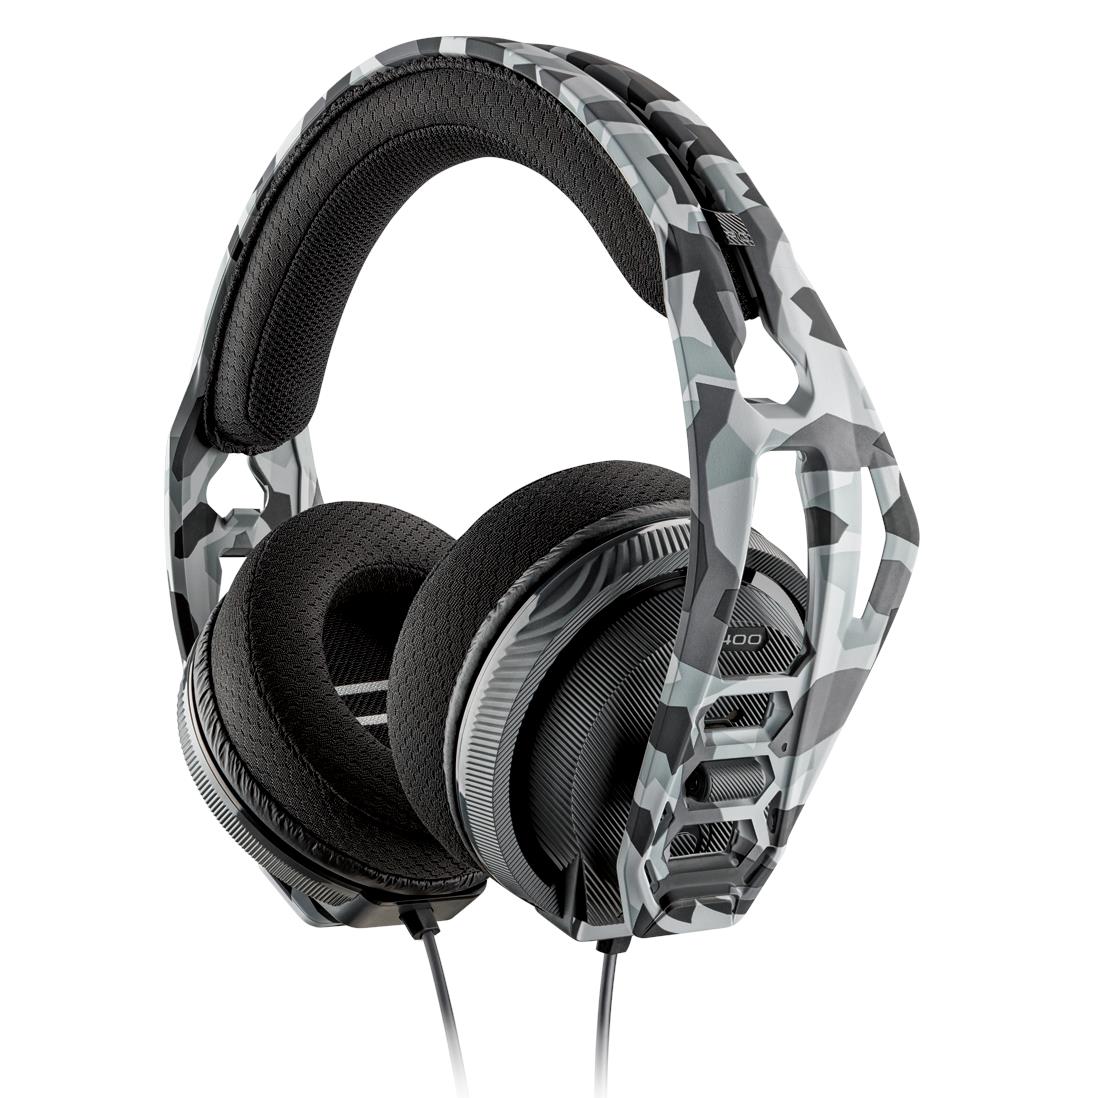 rig 400 hs stereo gaming headset for playstation (arctic camo)